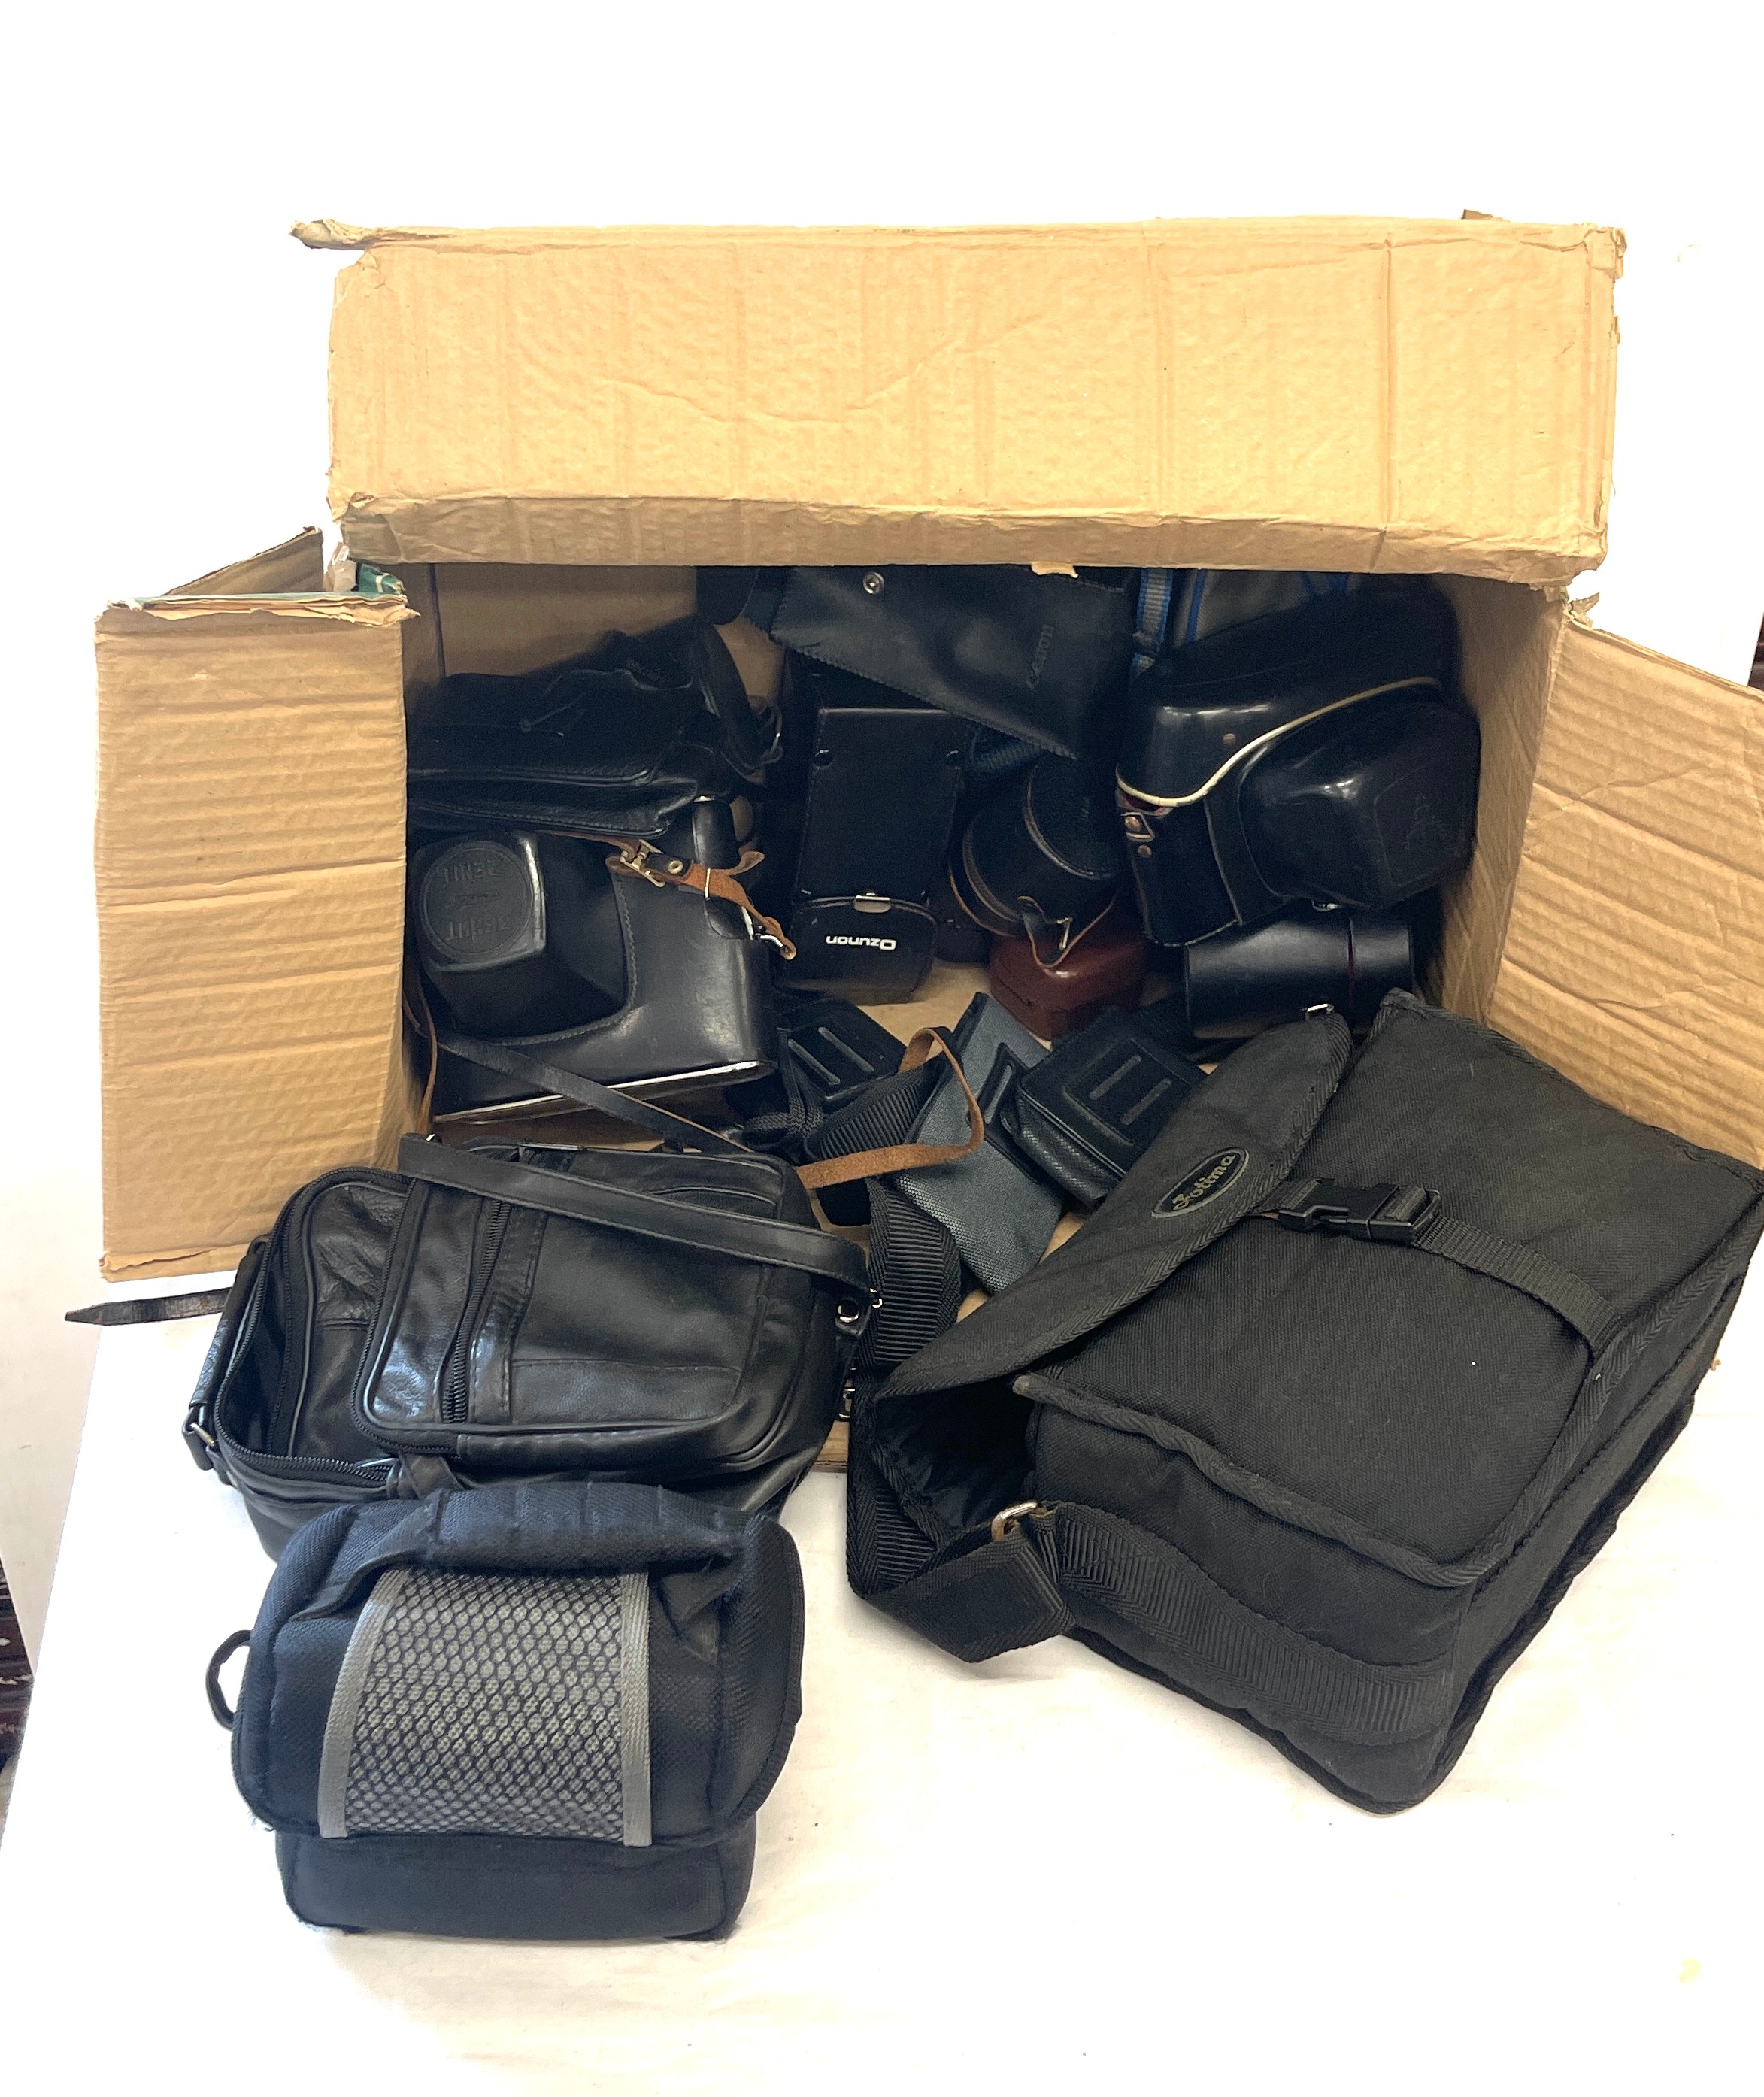 Large selection of empty camera bags